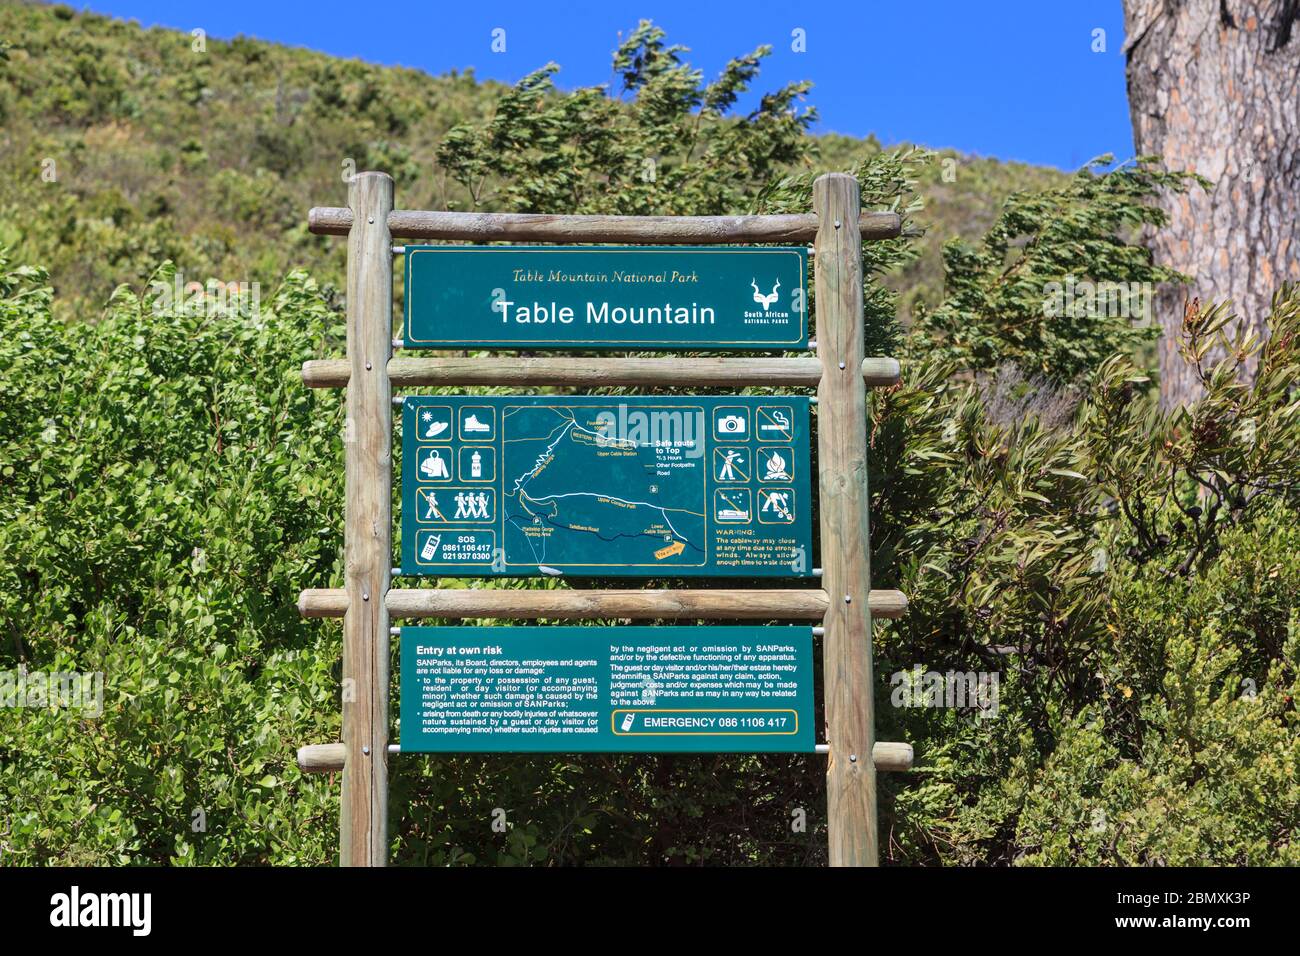 Table Mountain entrance and route sign, Table Mountain National Park, Cape Town, South Africa Stock Photo